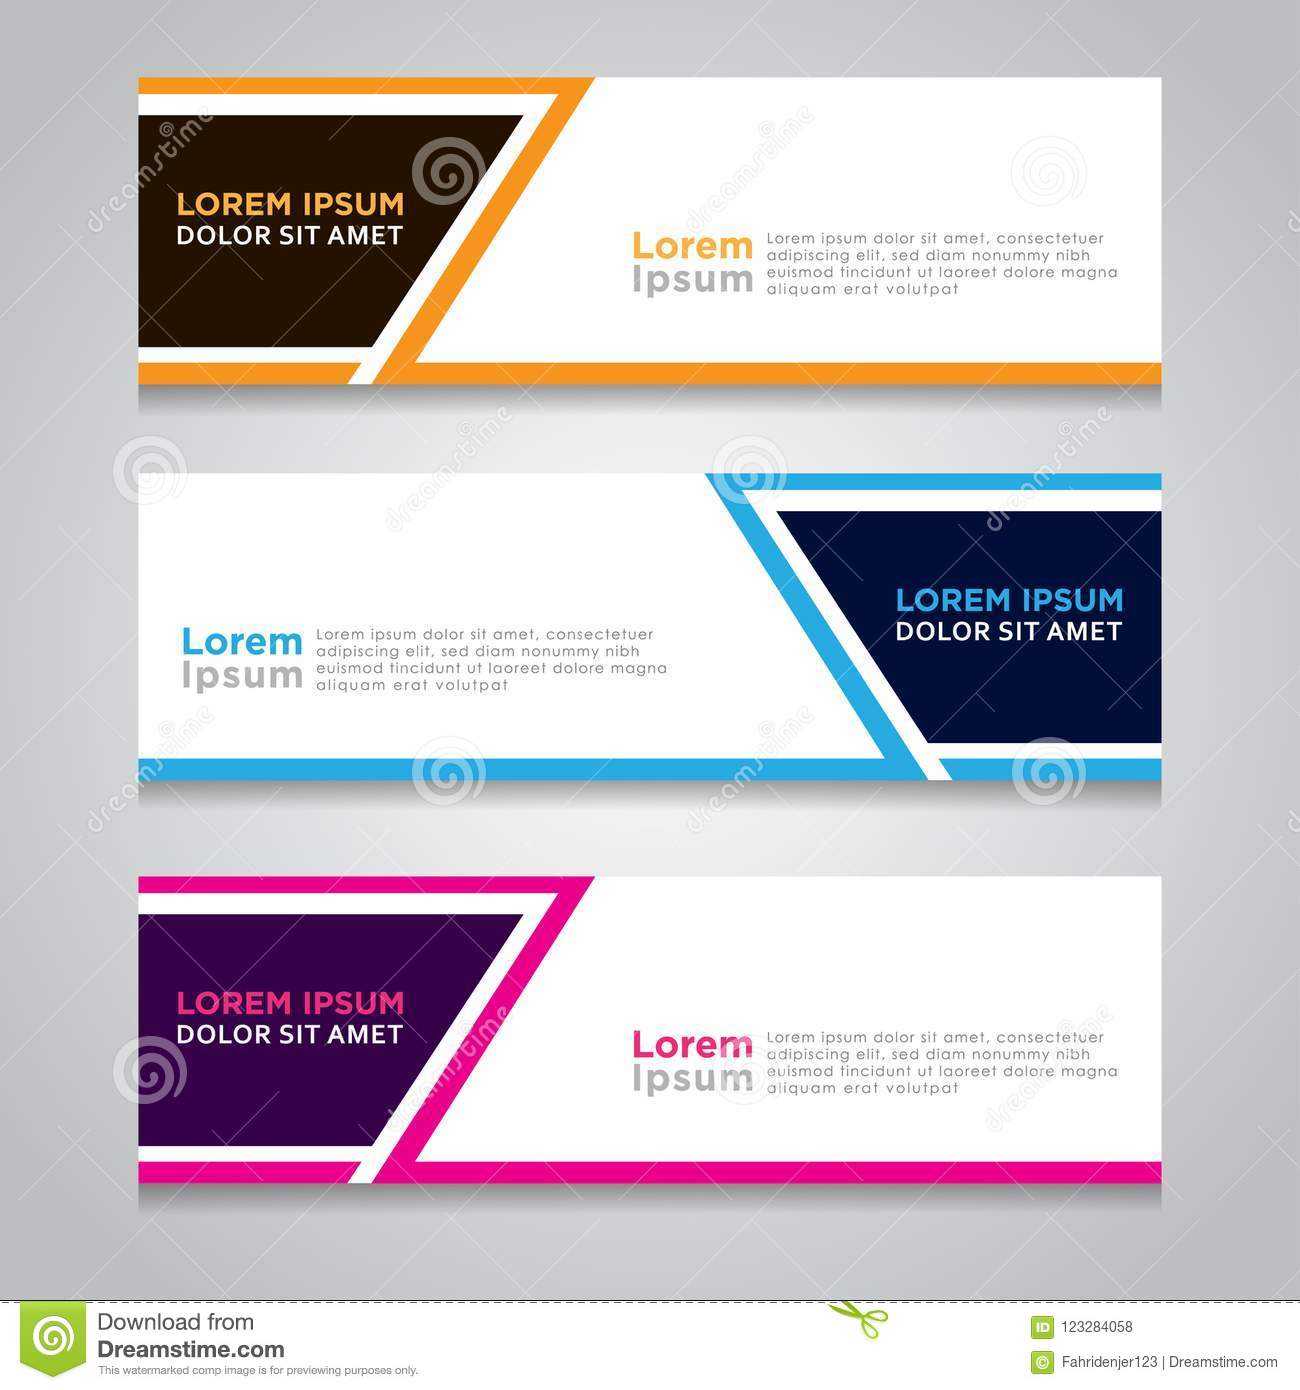 Vector Abstract Design Banner Template. Stock Vector Regarding Website Banner Design Templates